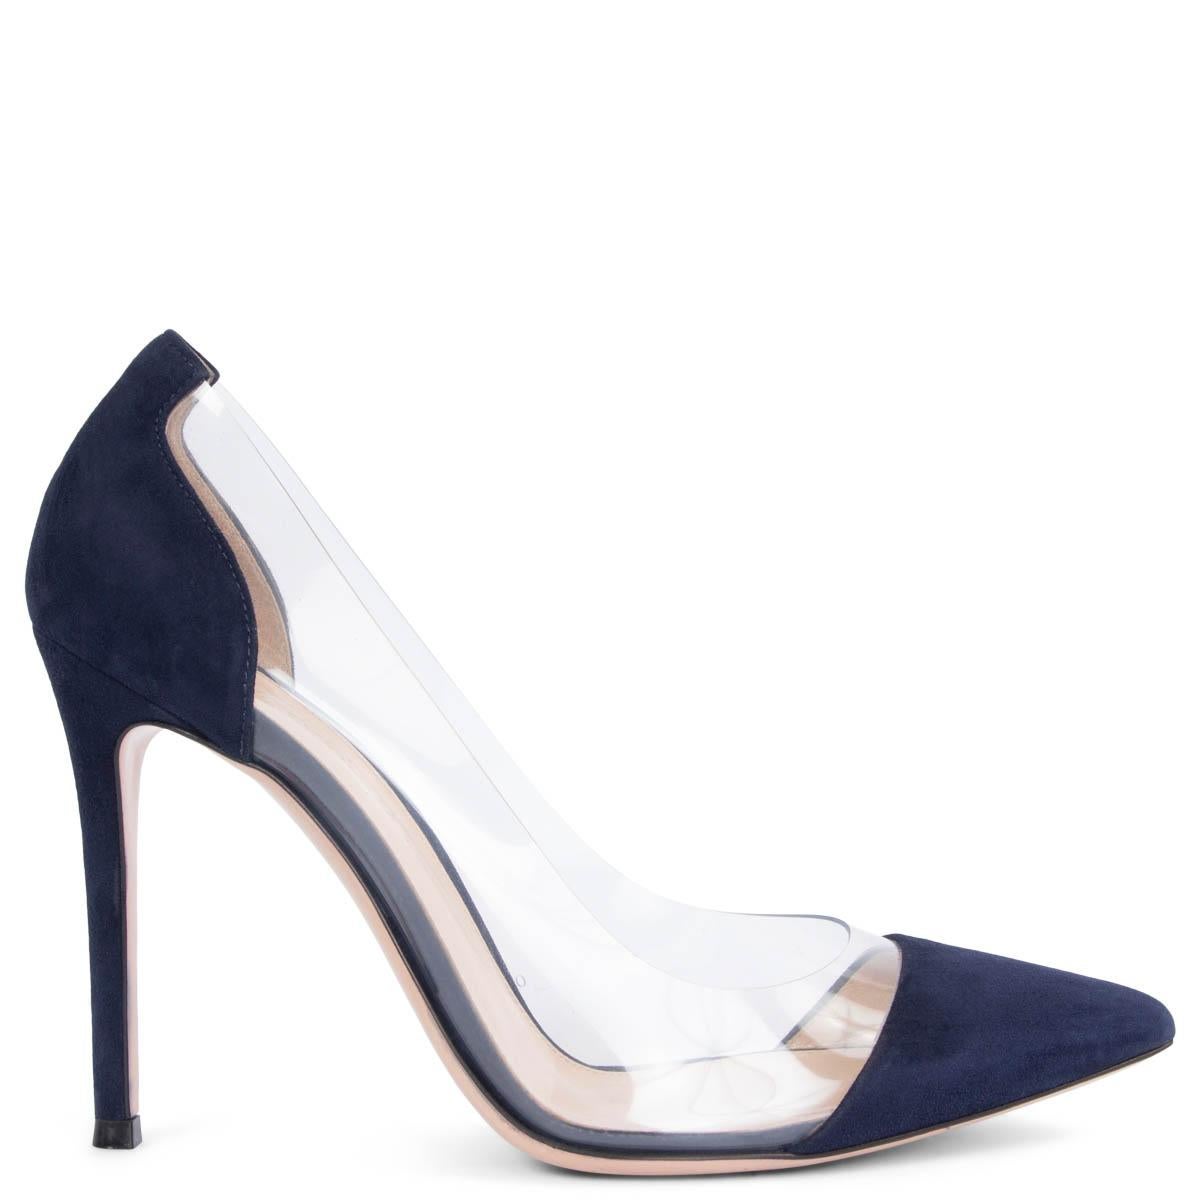 GIANVITO ROSSI navy blue suede PLEXI 105 Pumps Shoes 37 For Sale